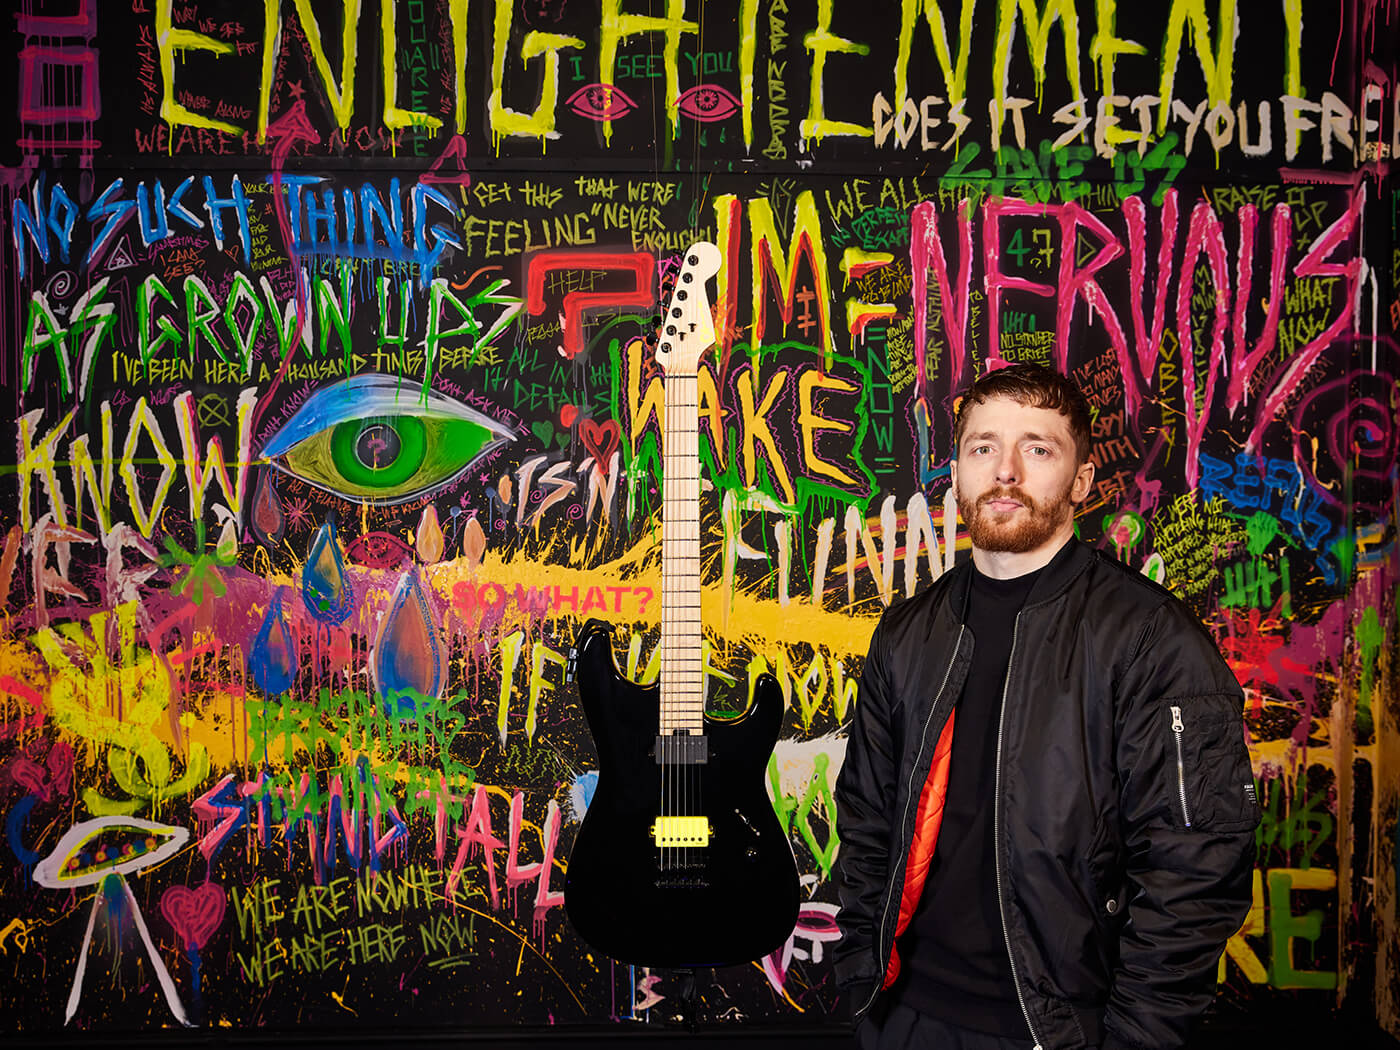 Sean Long with a guitar in a room filled with graffiti